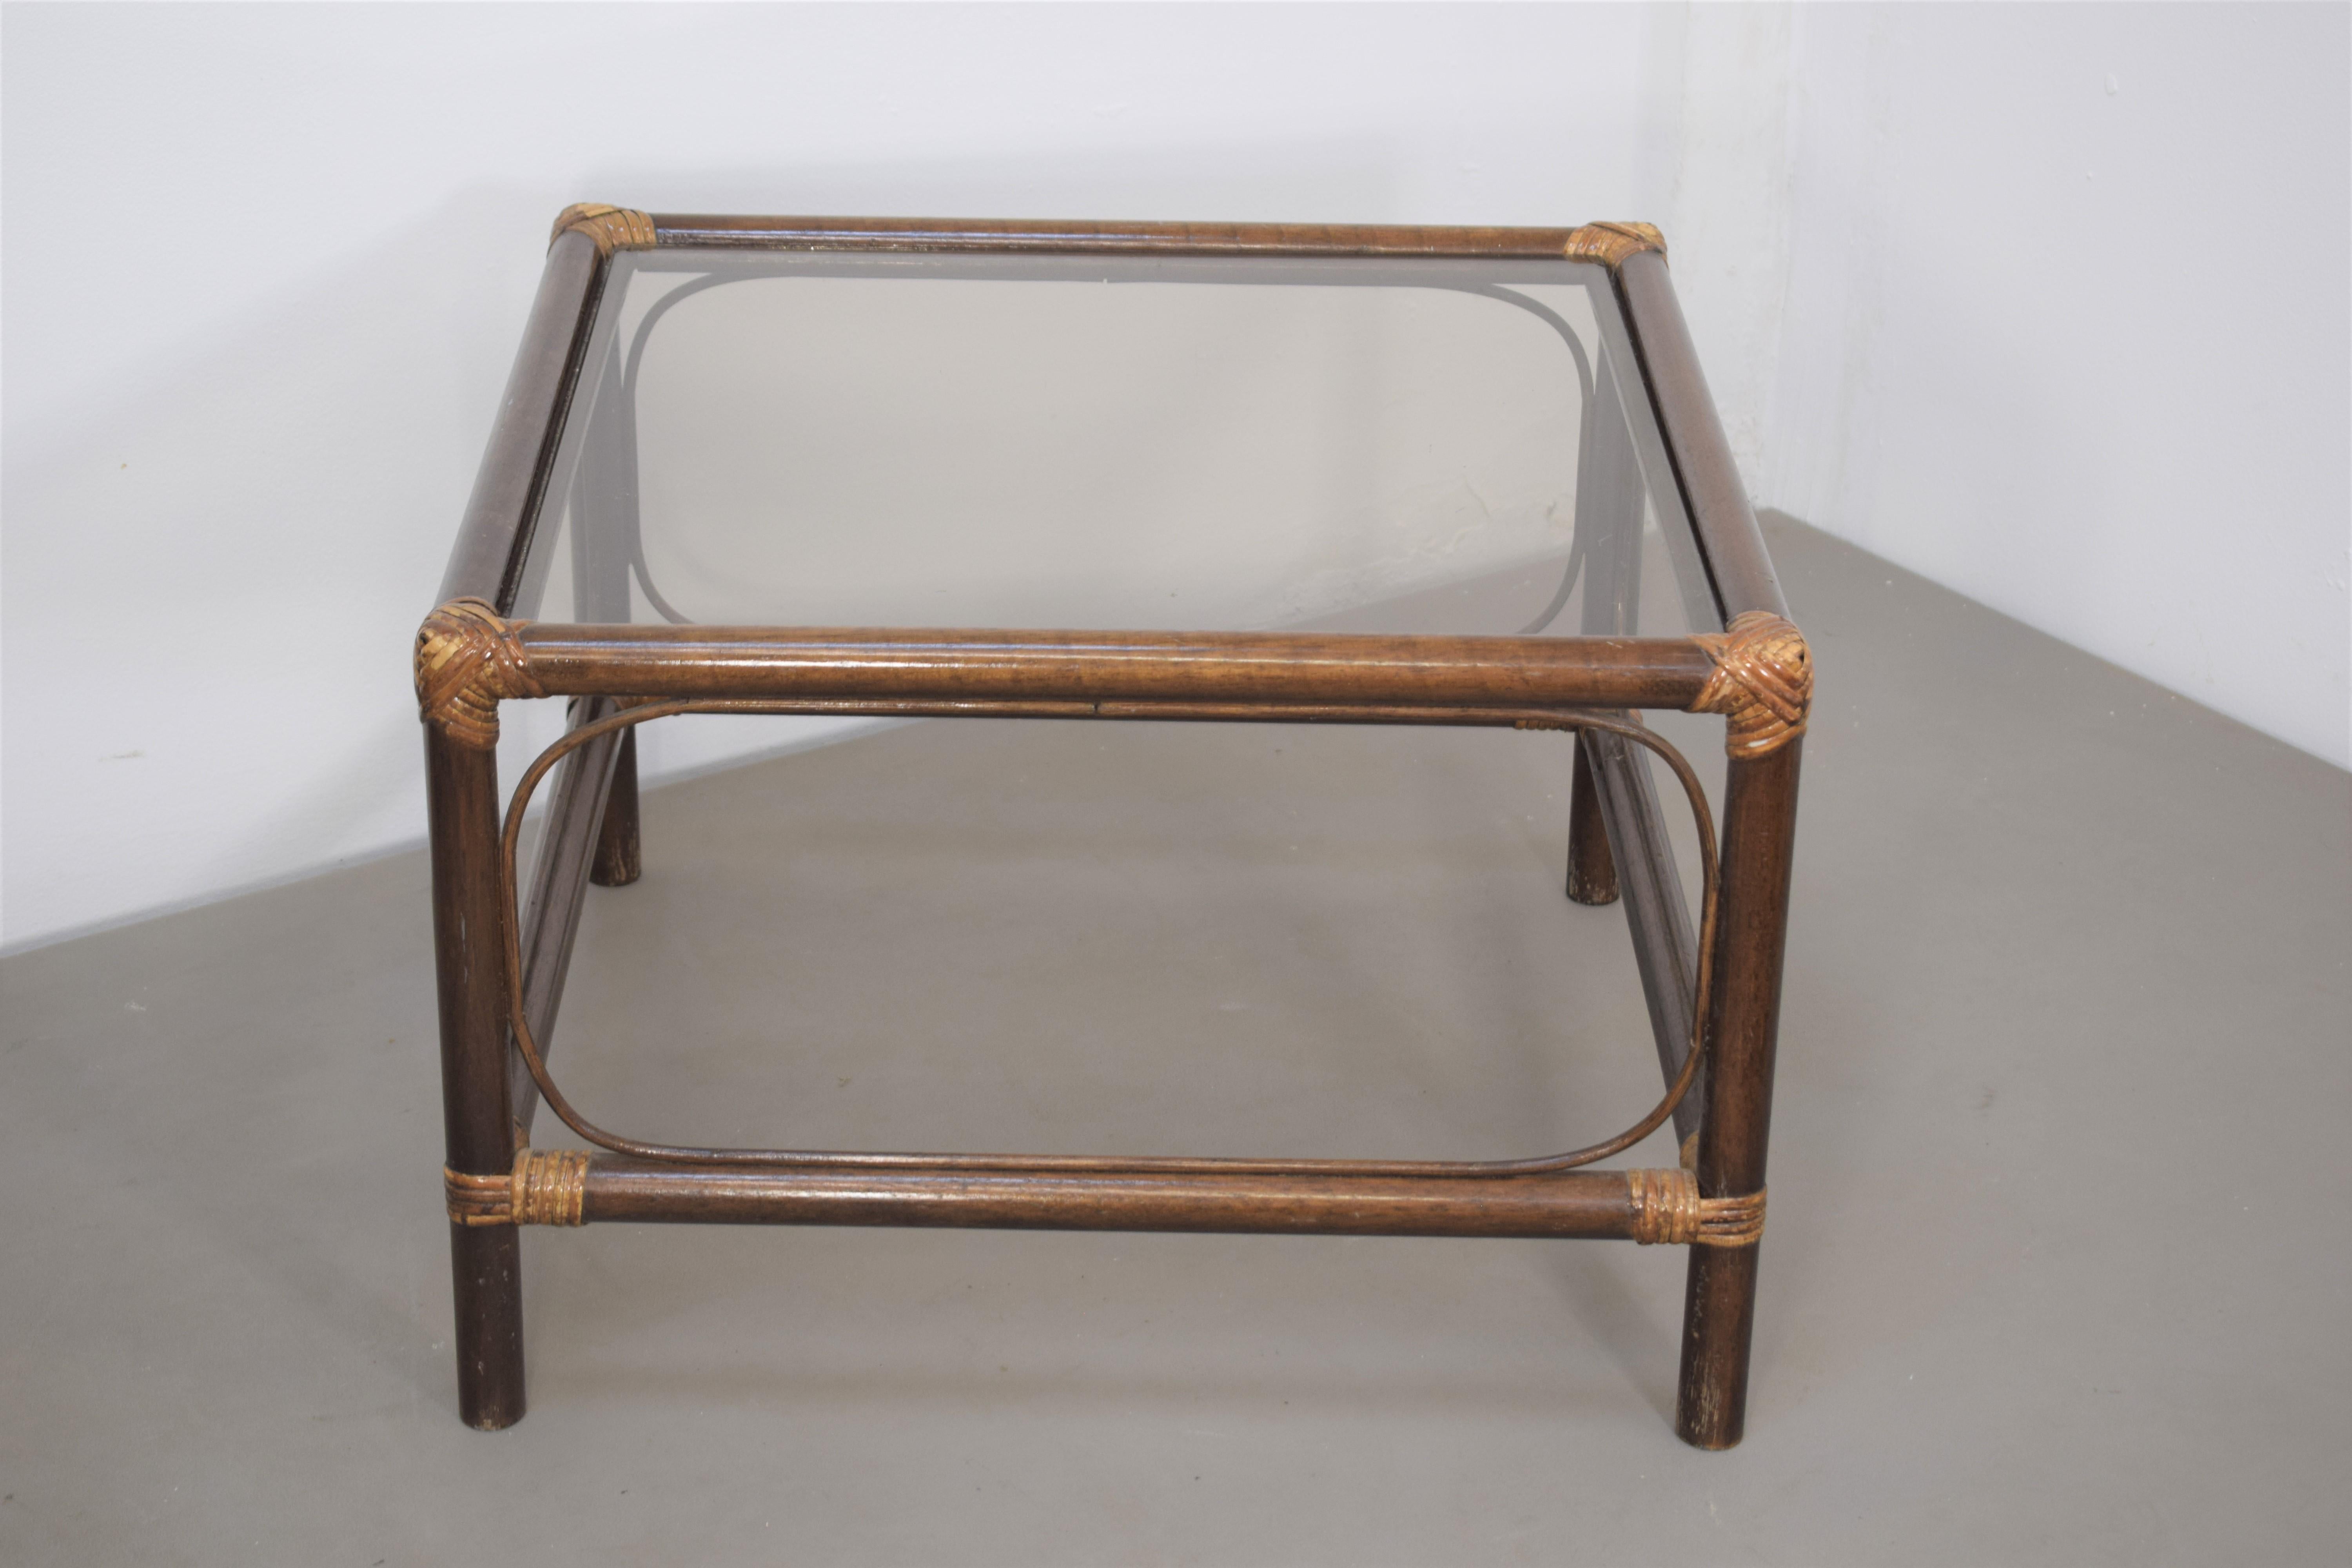 Italian bamboo and smoked glass coffee table, 1960s.

2 Pieces available. 

Dimensions: H= 40 cm; W= 60 cm; D= 60 cm.